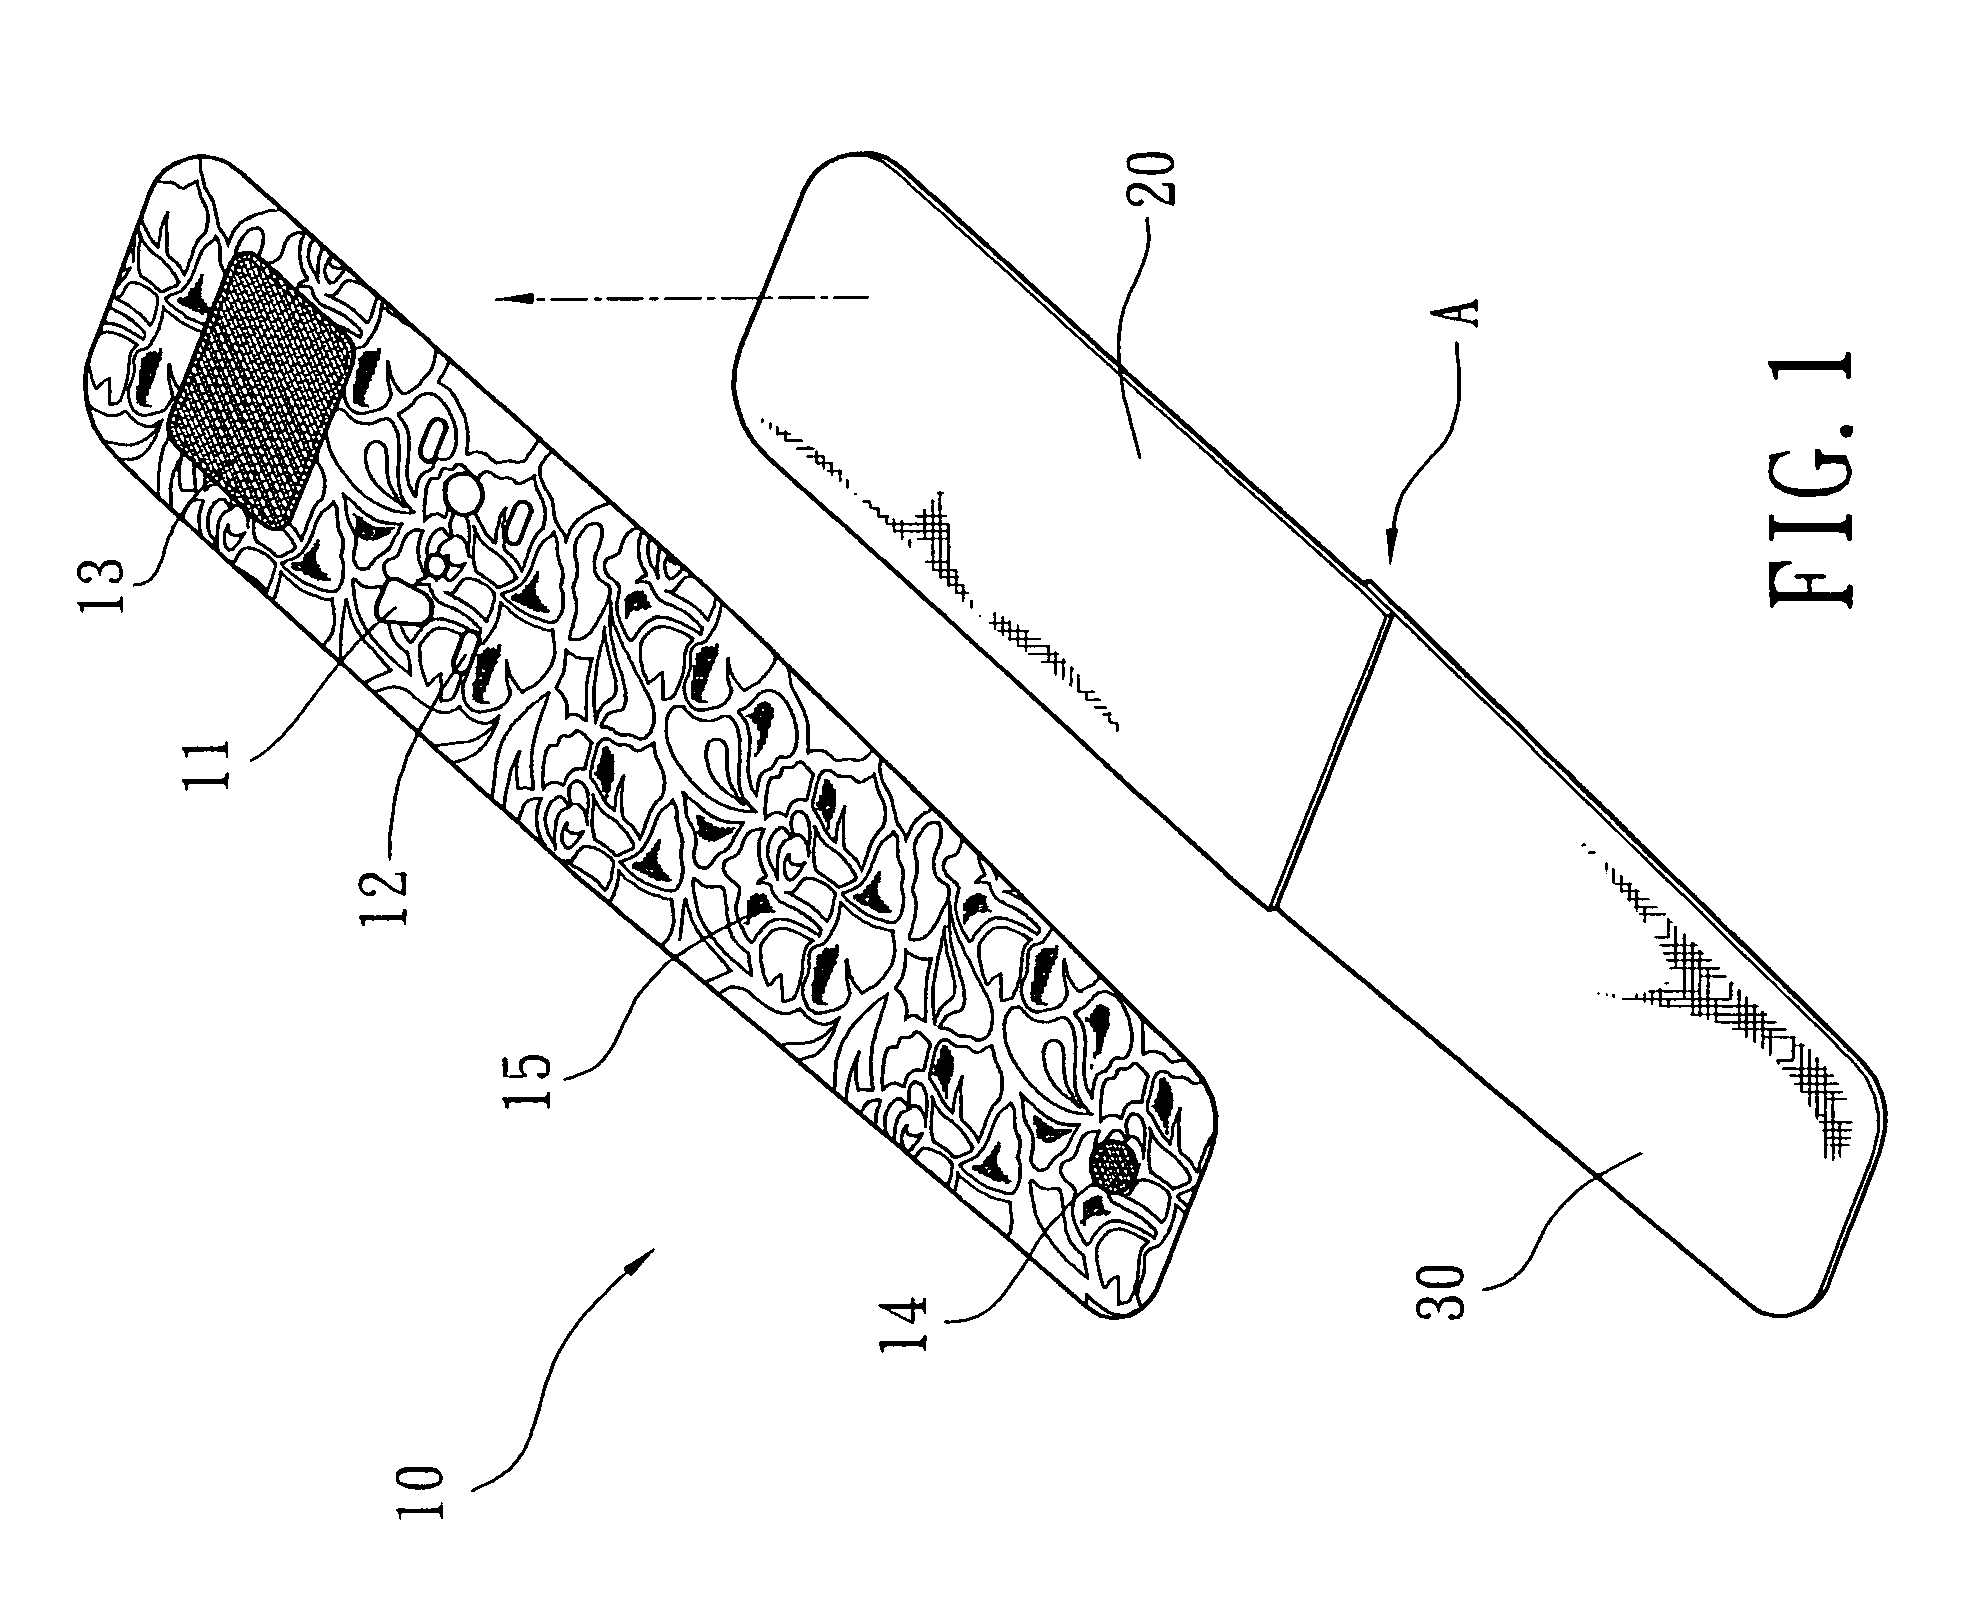 Stamp structure of a pattern on a surface of wrist band of a haemonamometer